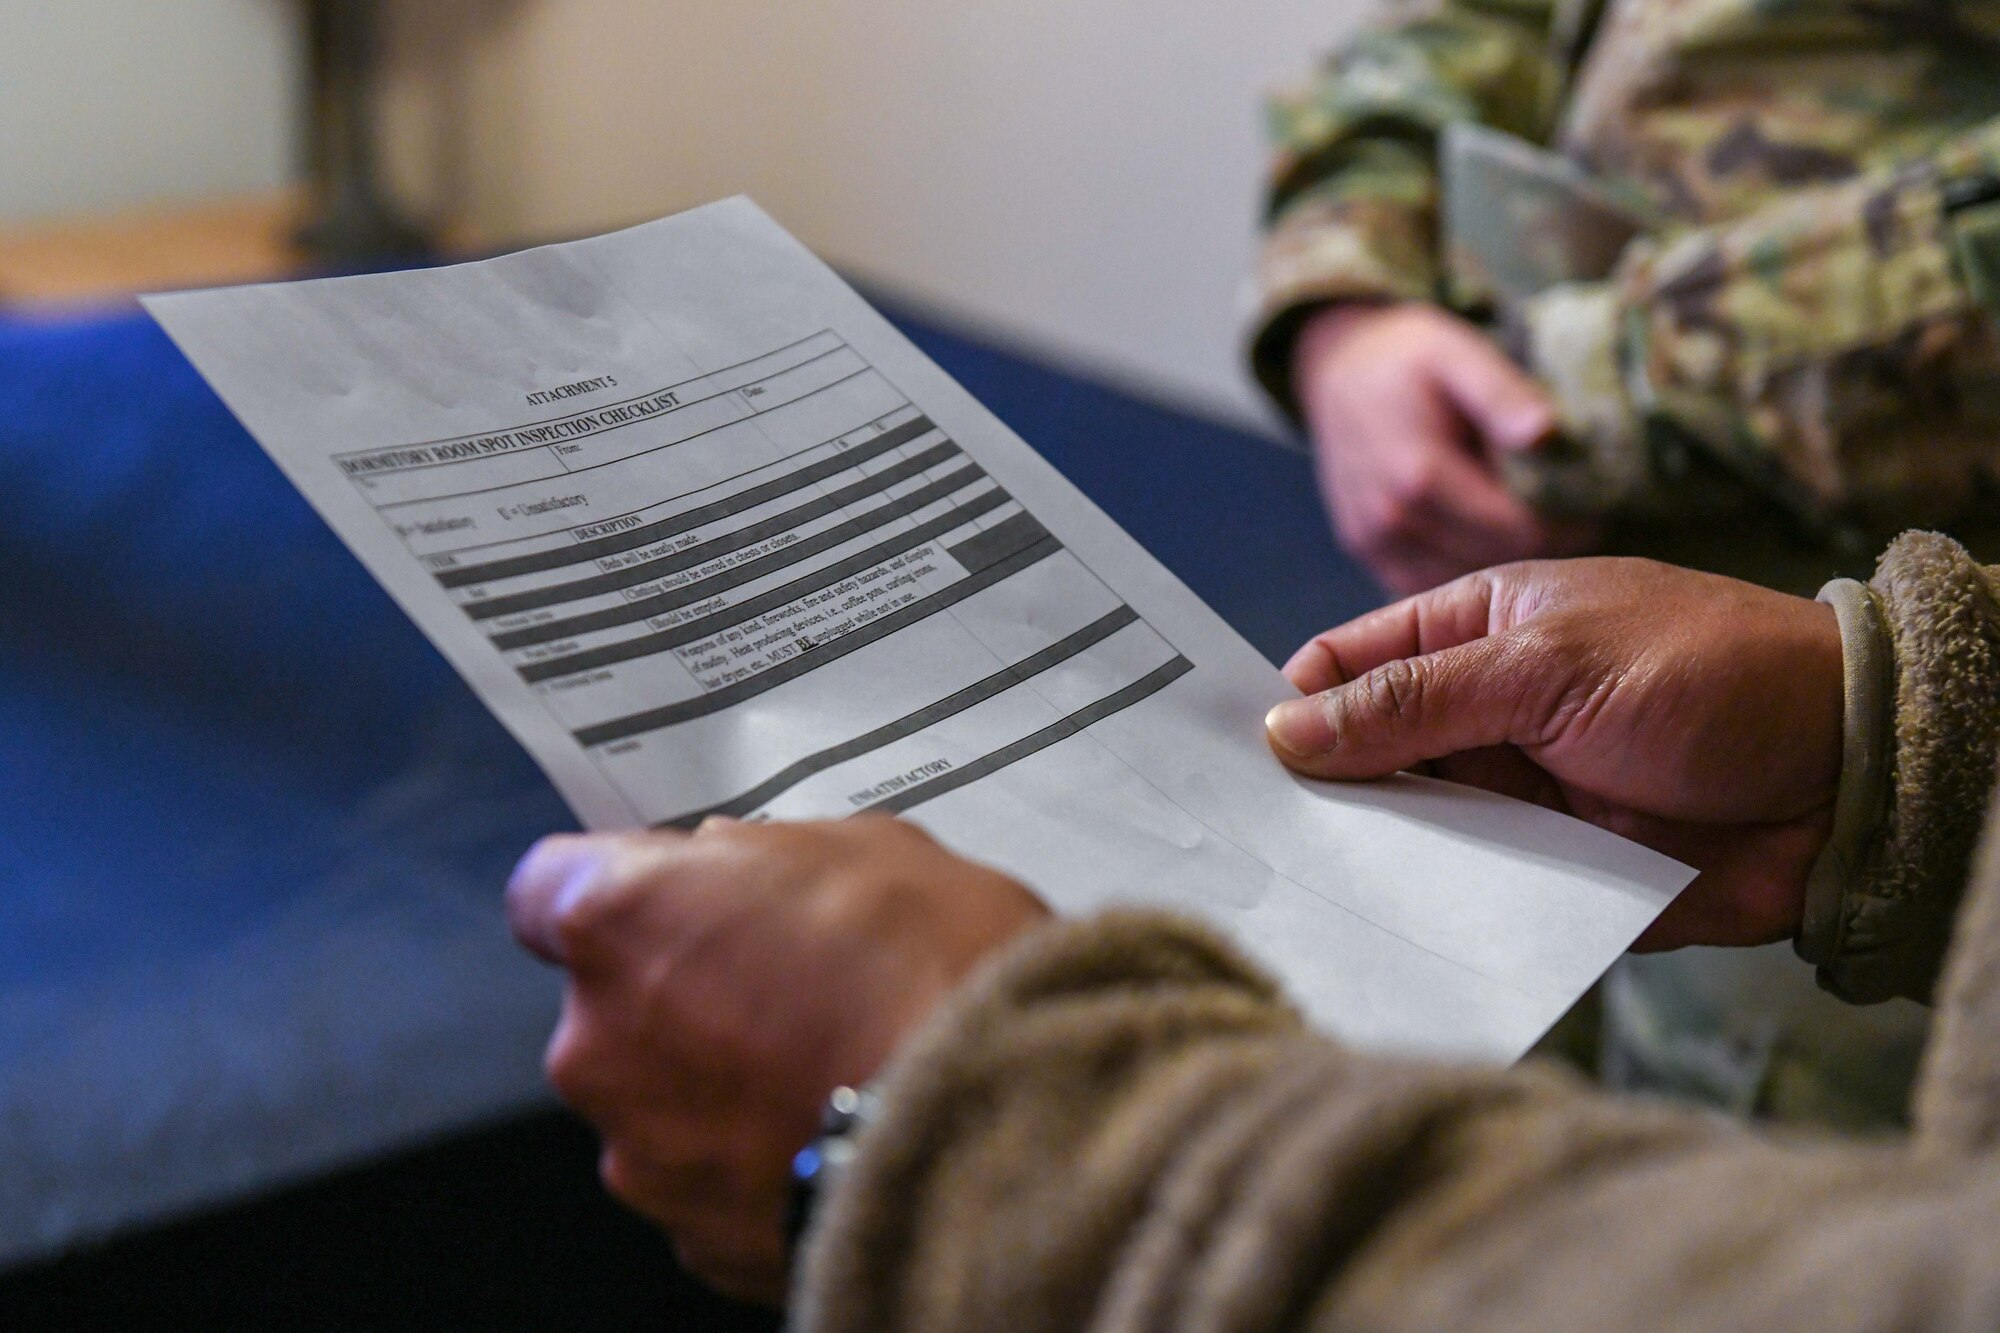 An Airman looks at a piece of paper.